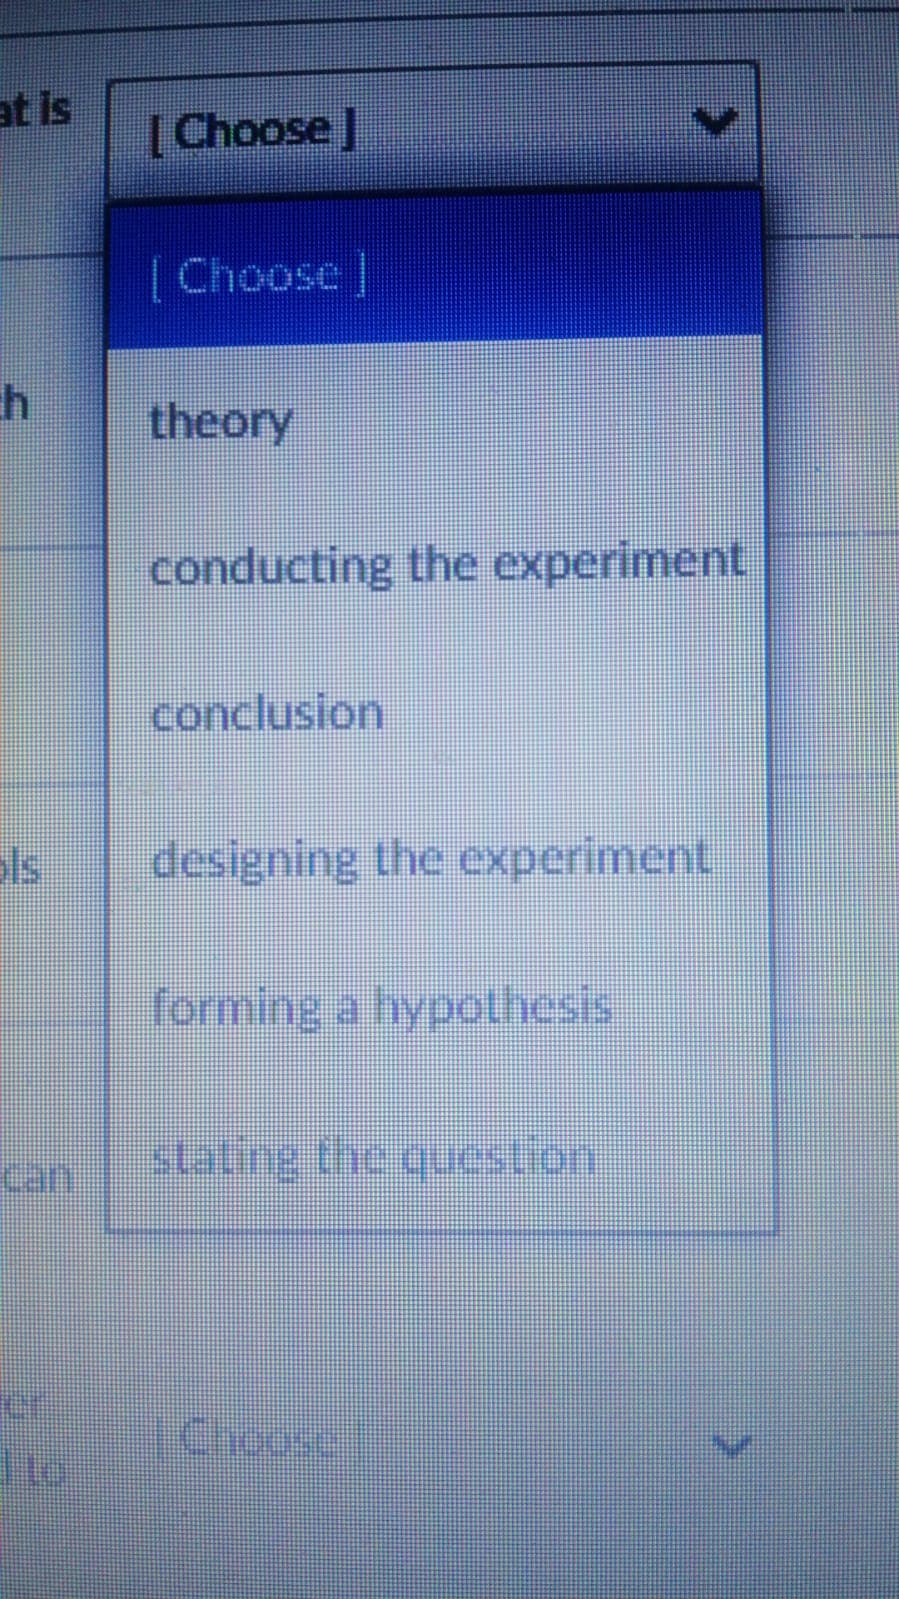 at is
[Choose]
[Choose ]
theory
conducting the experiment
conclusion
ols
designing the experiment
forming a hypothesis
Can
staling the quuestion
Choose
